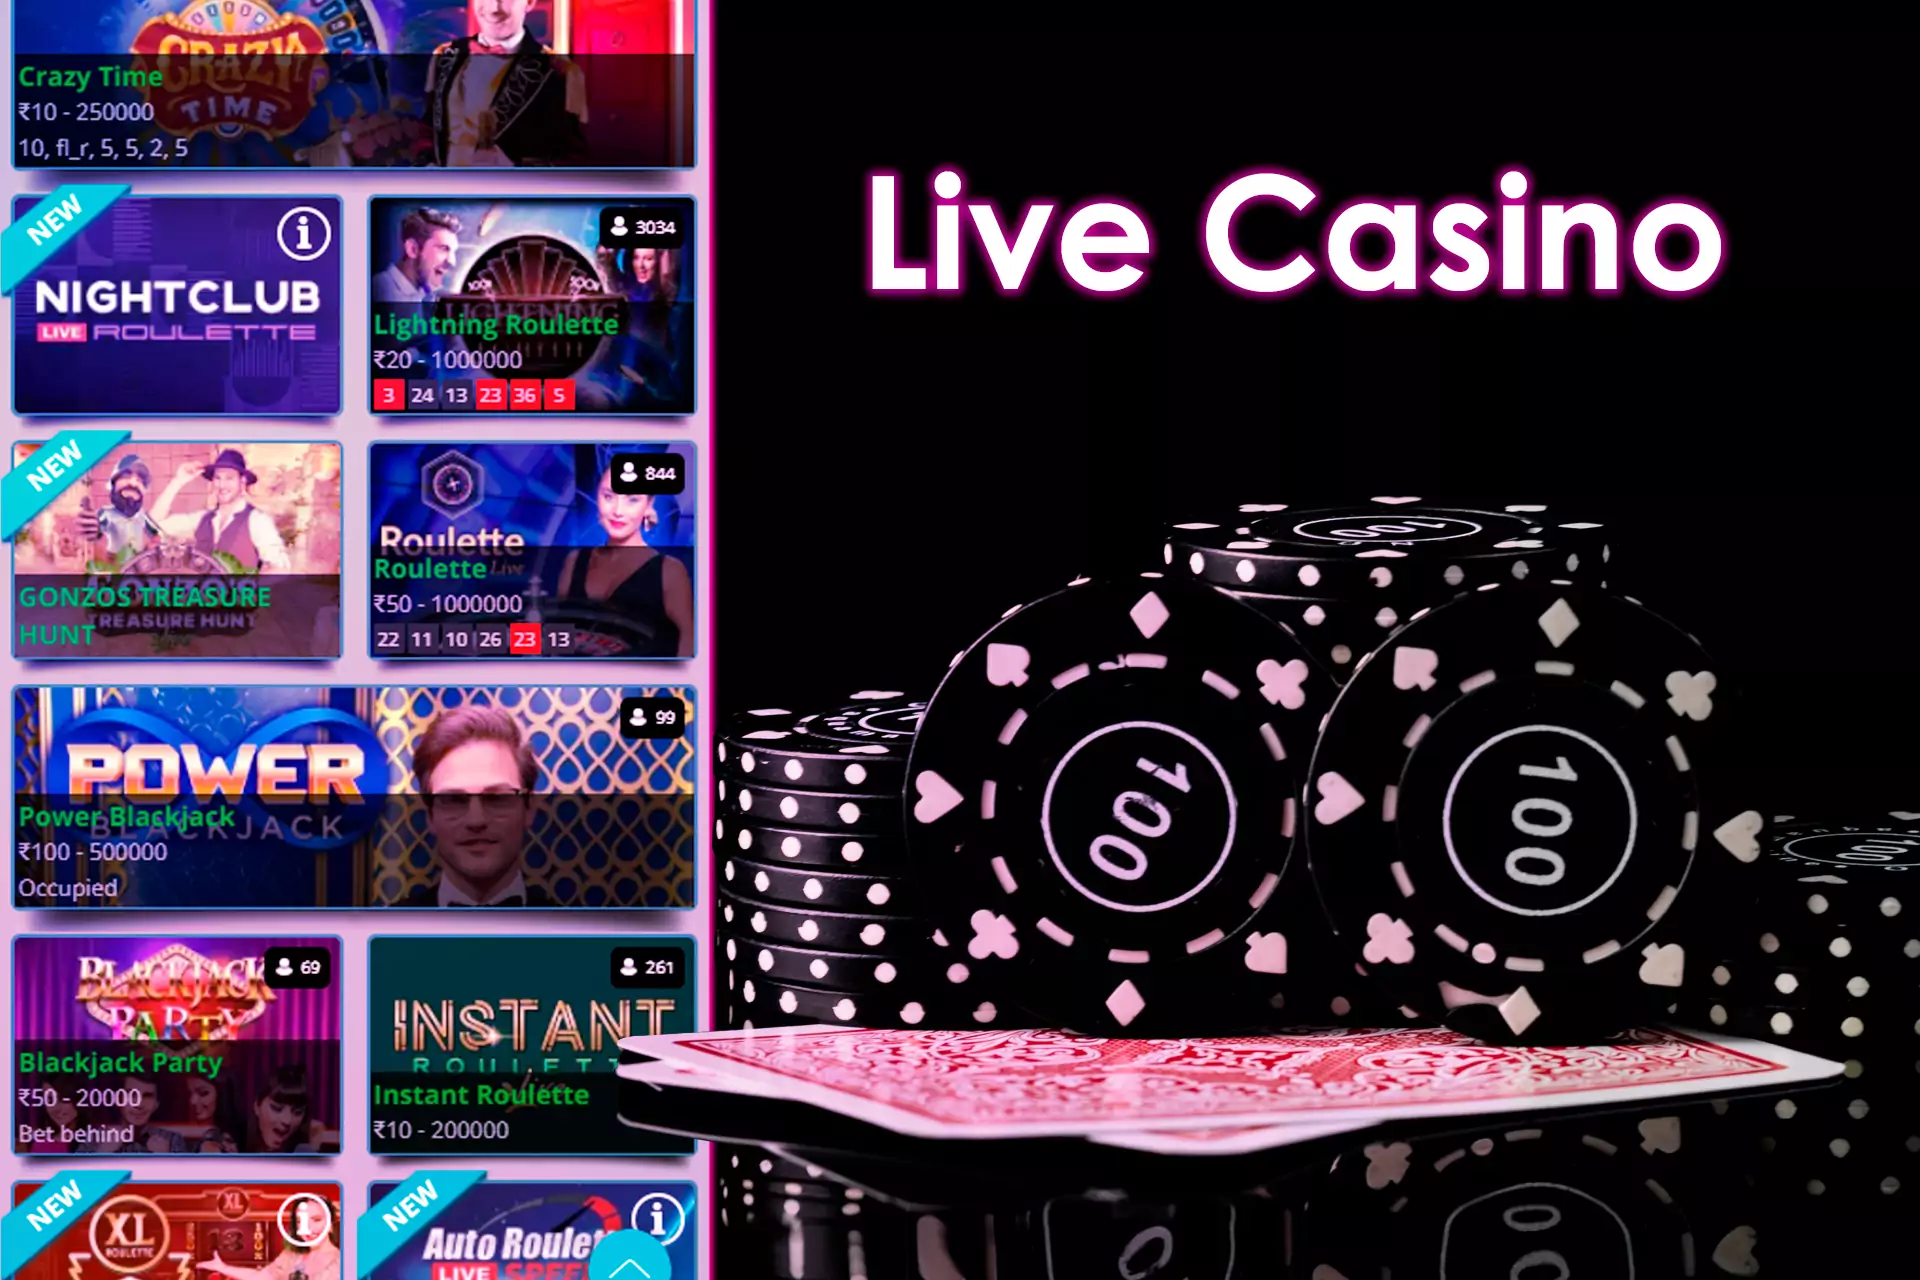 The Live Casino section allows users to play casino games with a live dealer.